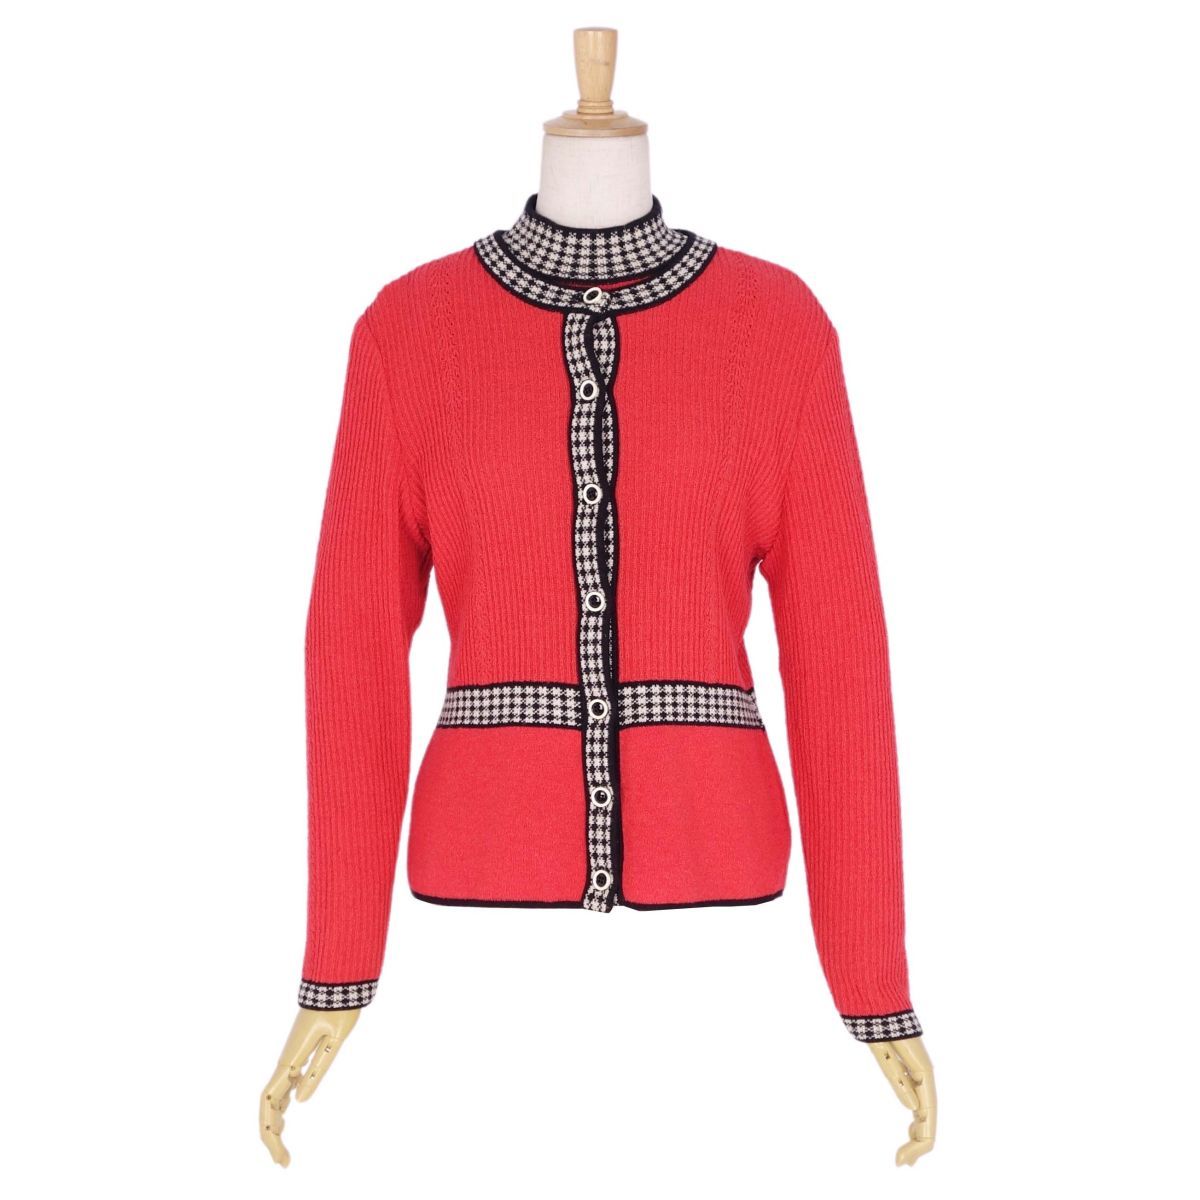  Christian Dior Christian Dior ensemble knitted sweater cardigan wool nylon tops M red color cf02mb-rm05c14481